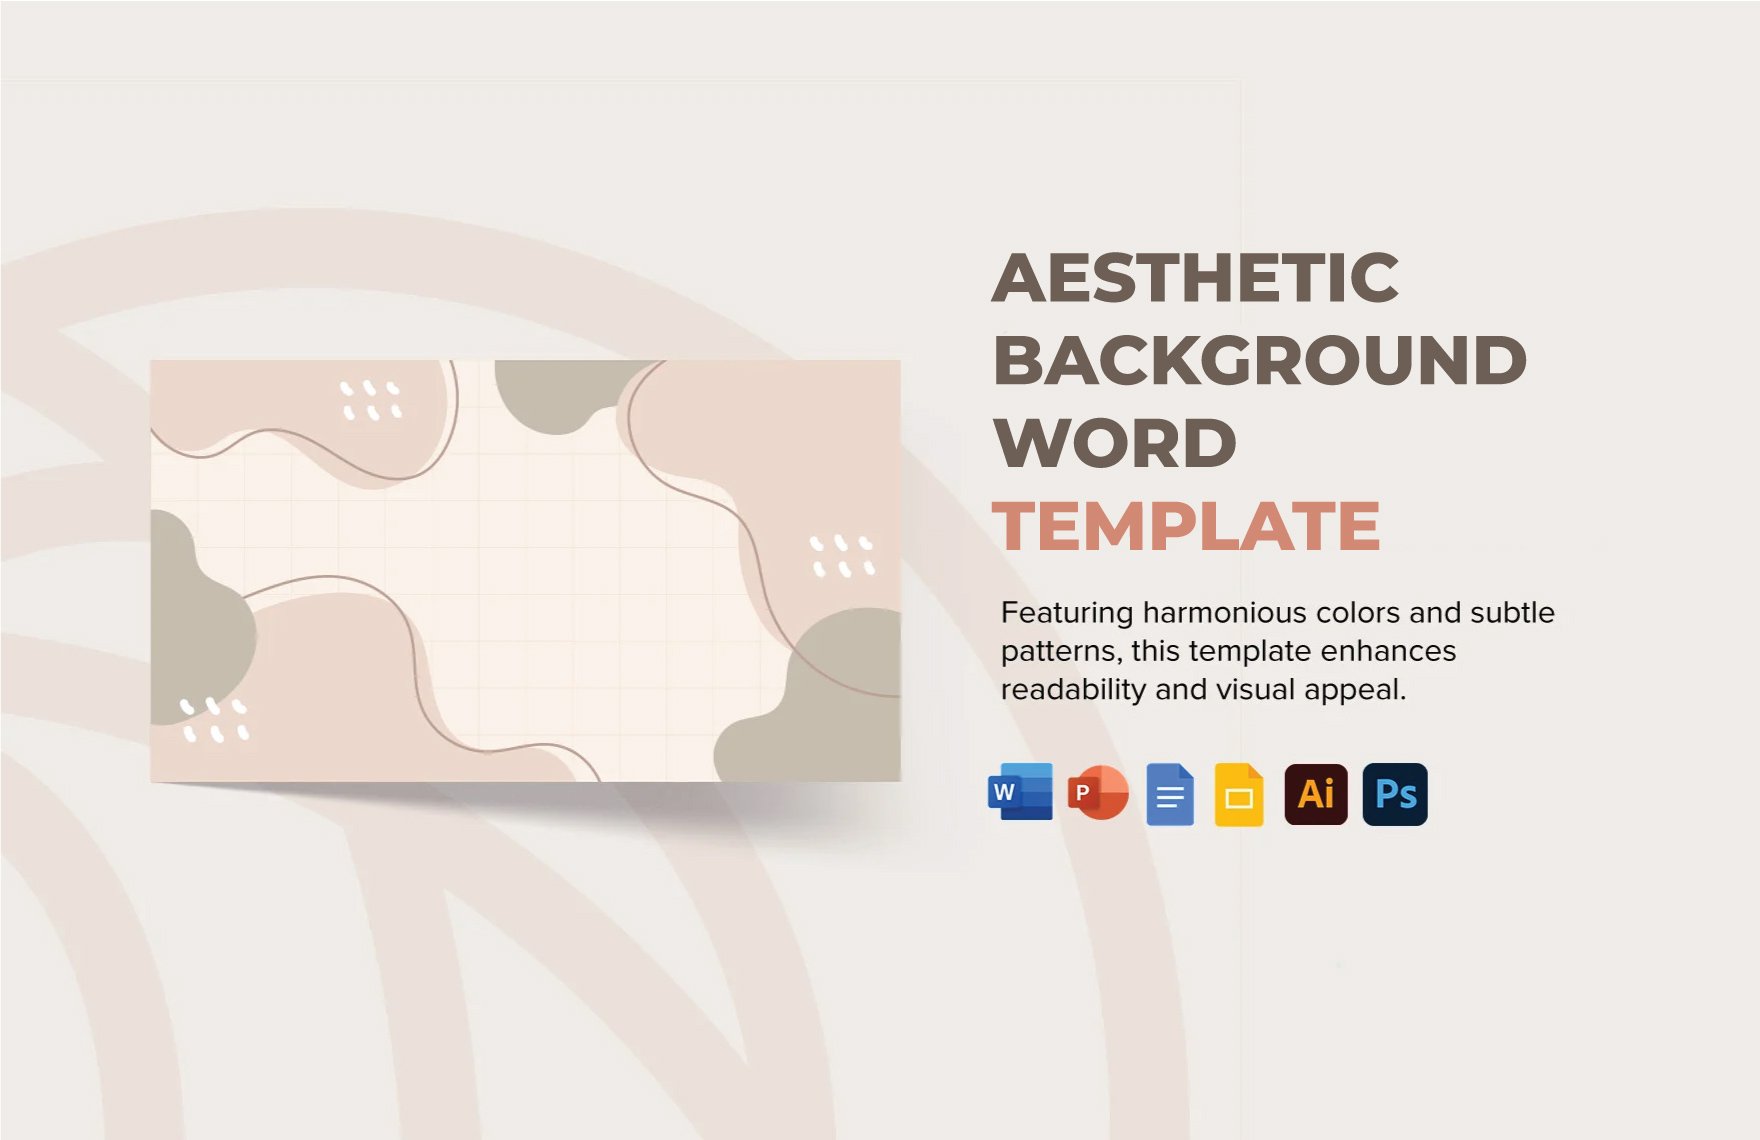 Free Aesthetic Background Word Template in Word, Google Docs, Illustrator, PSD, PowerPoint, Google Slides